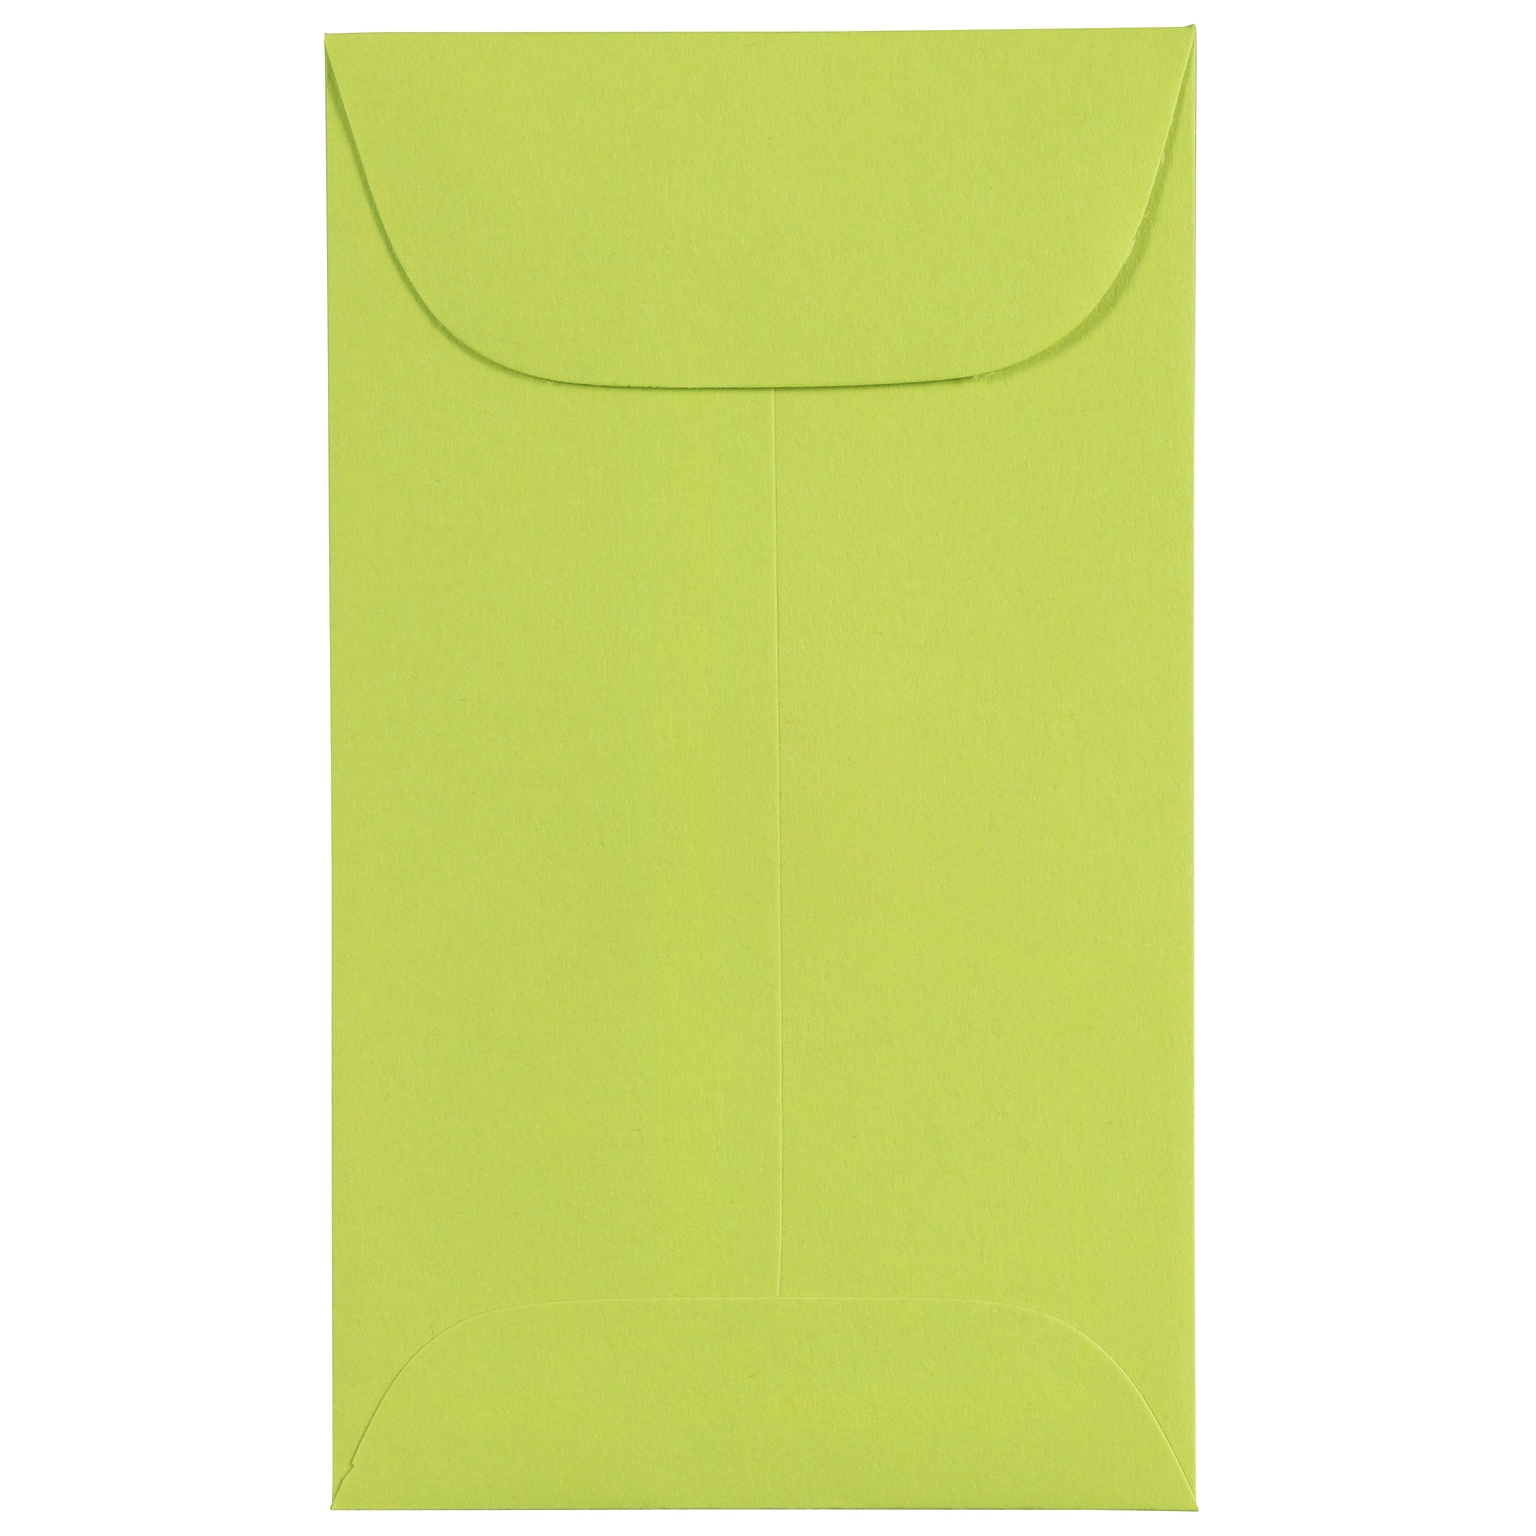 JAM Paper #3 Coin Business Colored Envelopes, 2.5 x 4.25, Ultra Lime Green, 100/Pack (356730536B)